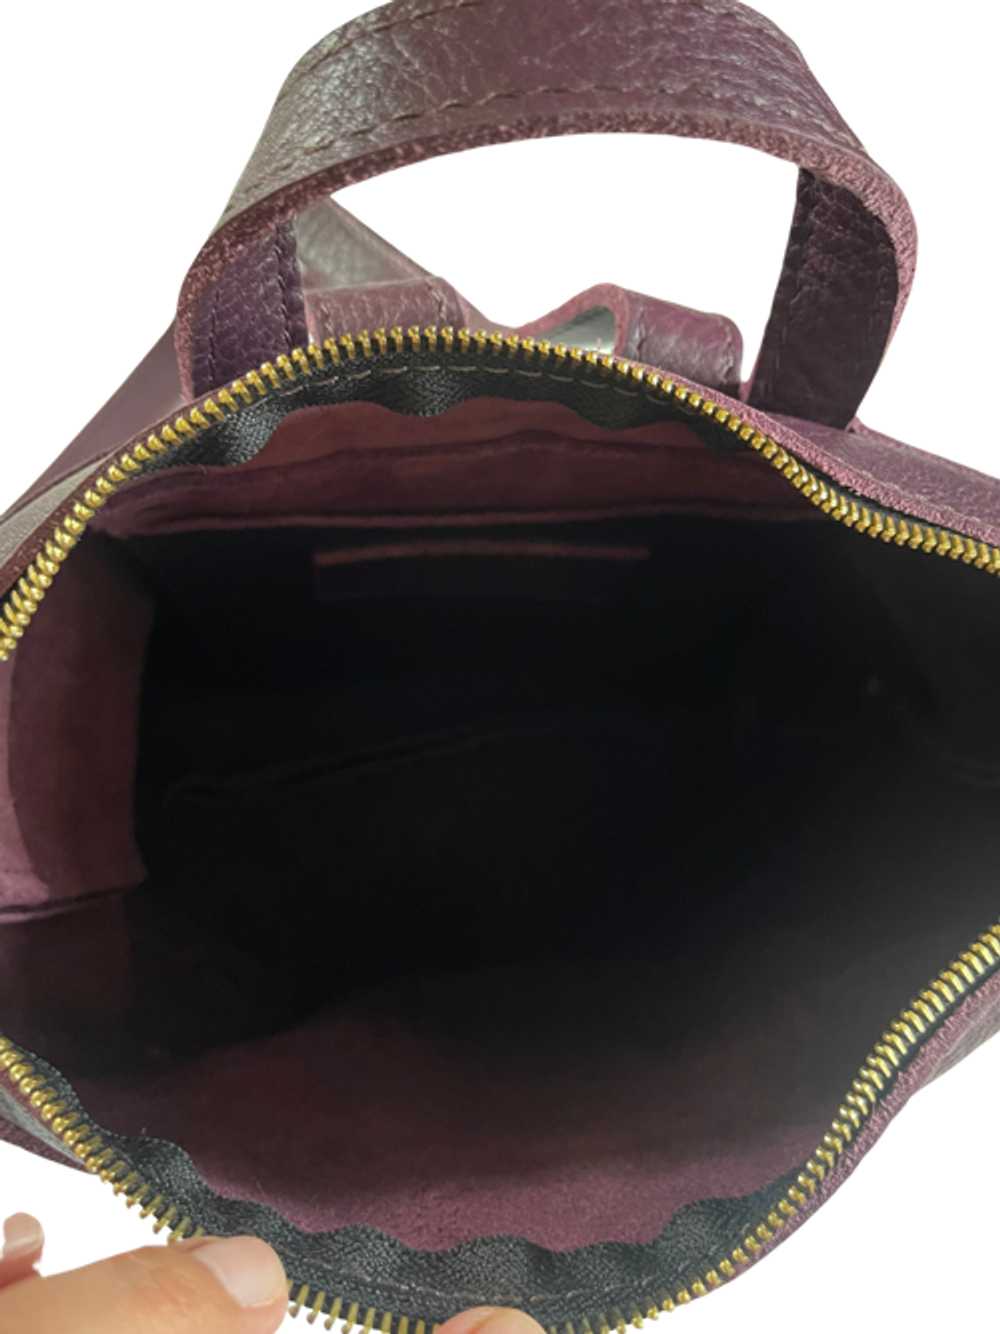 Portland Leather Tote Backpack - image 5